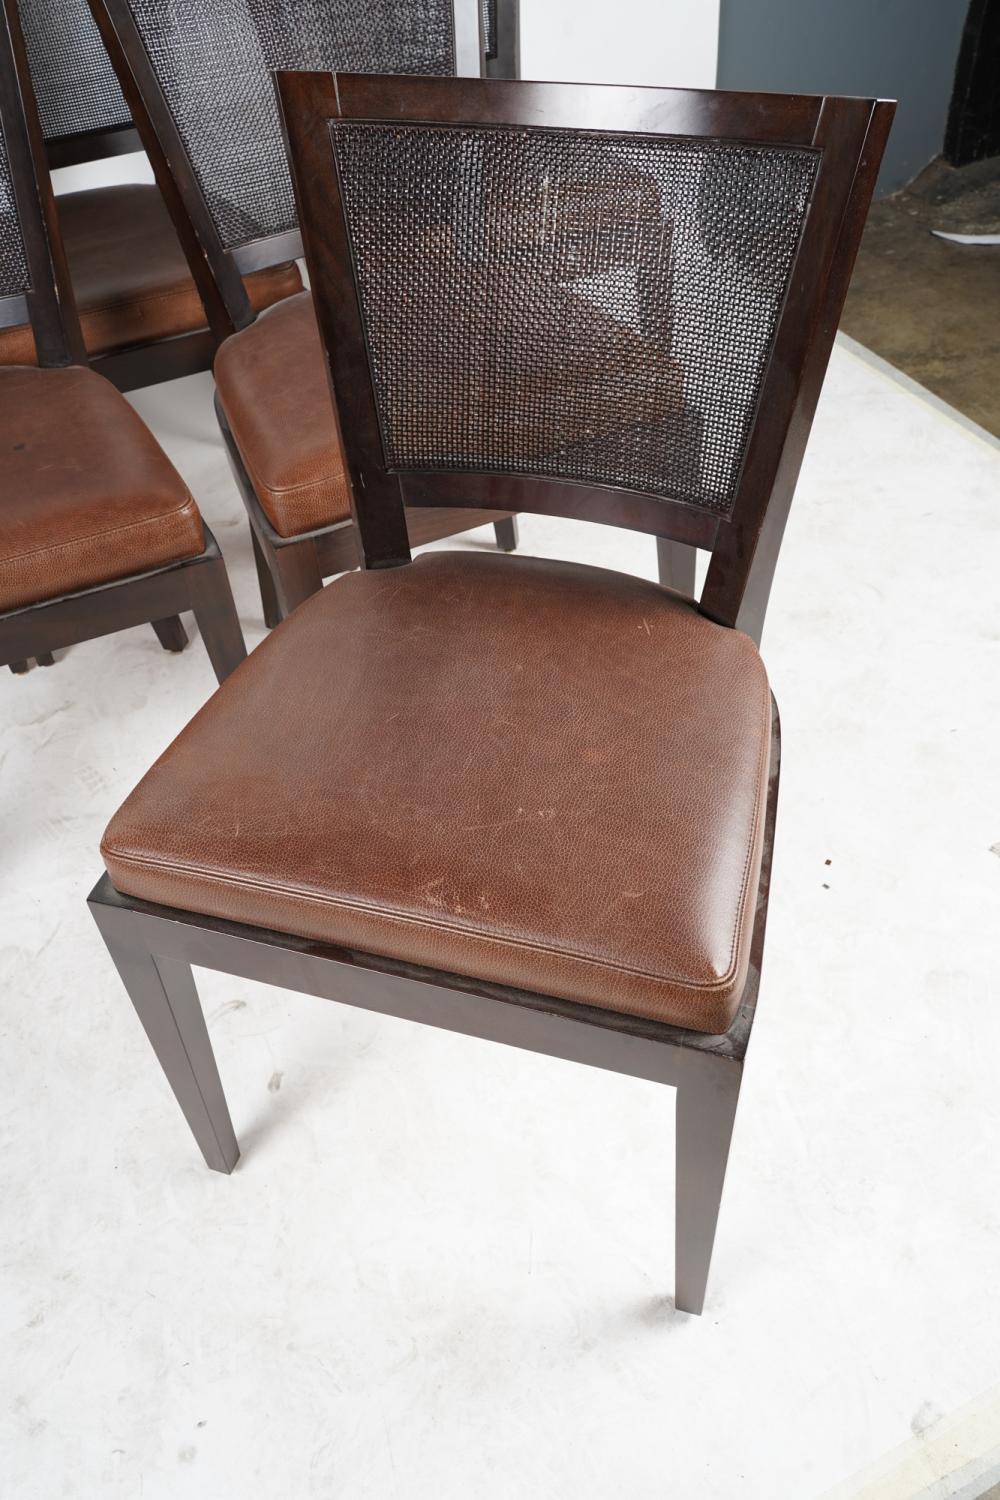 Set Six Promemoria Caffe Caned Leather Dining Chairs Contemporary Italian C 2000 en vente 1